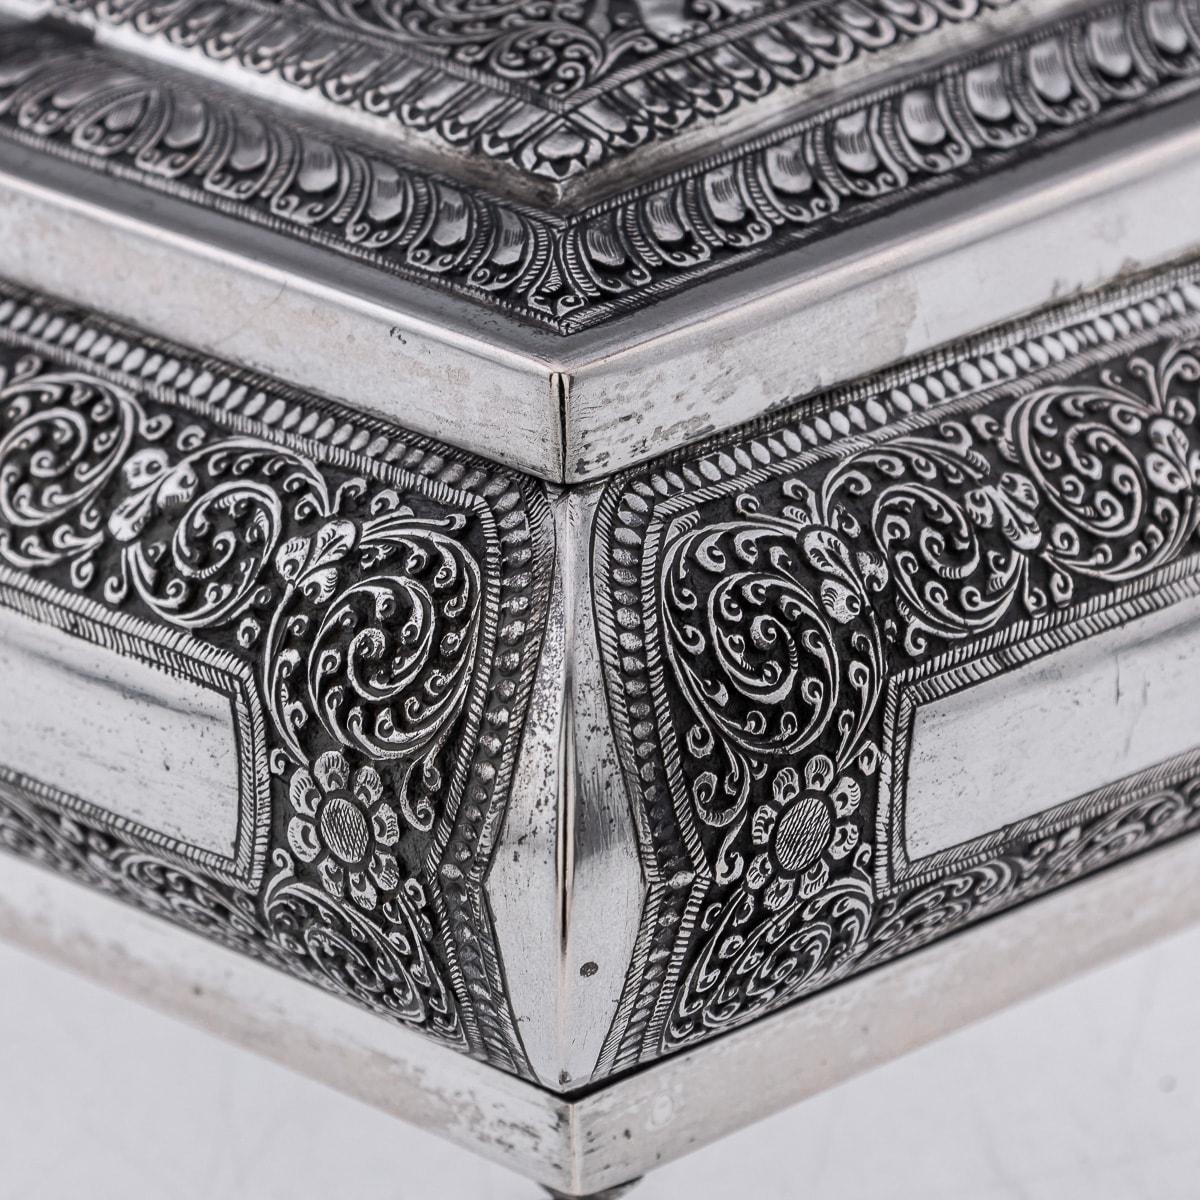 Mid 20th Century Sri Lankan Solid Silver Repousse Box, Colombo c.1930 For Sale 11